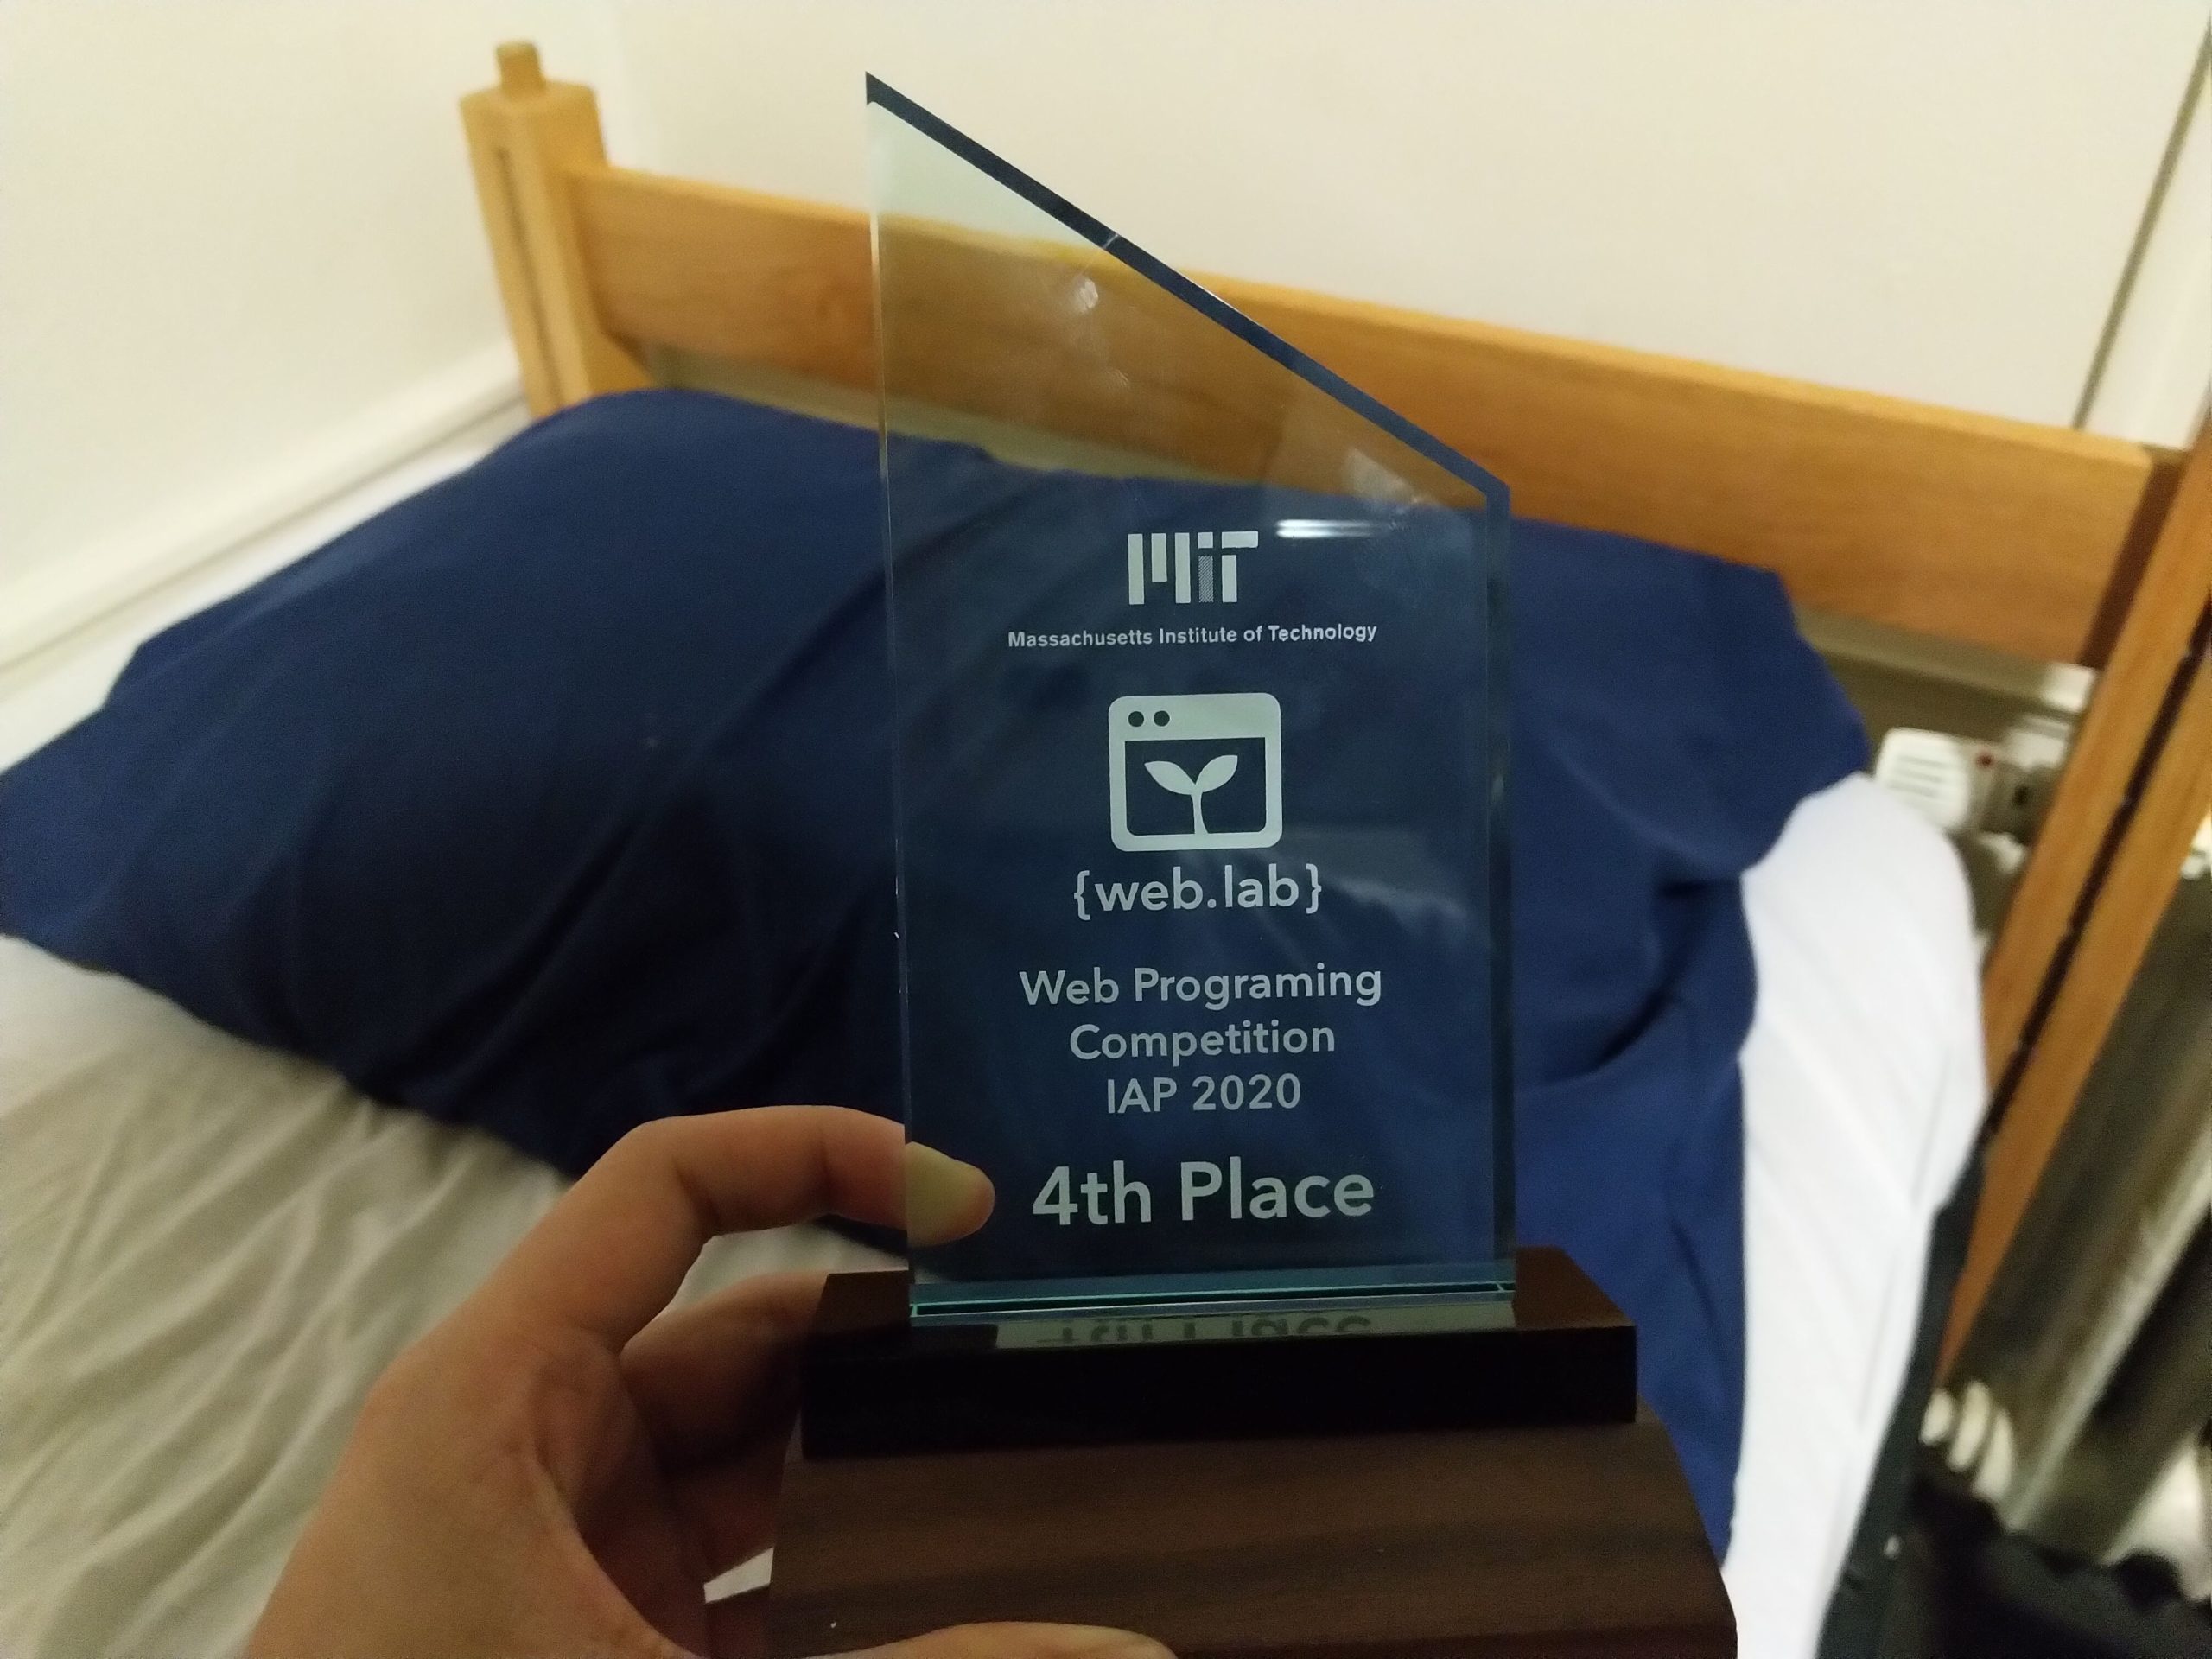 a transparent plaque. after the mit logo and the weblab logo, it reads web programing competition iap 2020 4th place